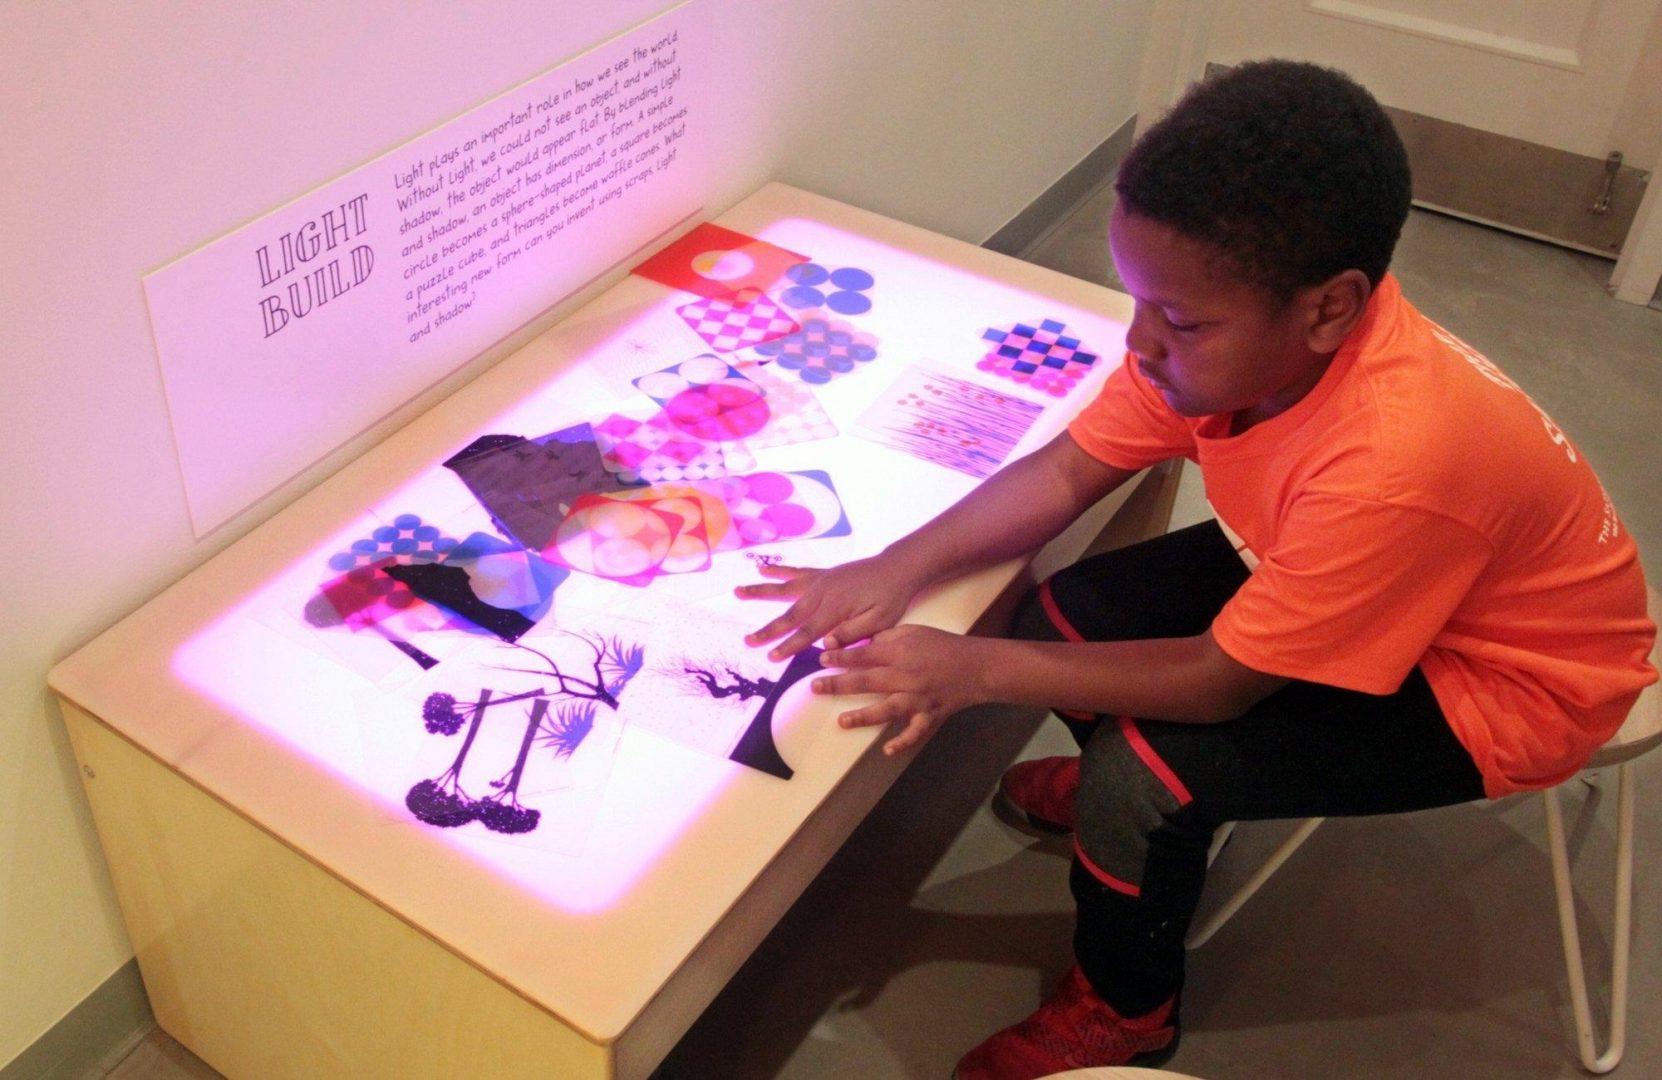 Reynard Richardson, 9 from the Salvation Army summer camp explores with the light table at Akron Art Museum's newly-opened Live Creative Studio on Friday June 7, 2019 in Akron, Ohio.  [Mike Cardew/Beacon Journal/Ohio.com]